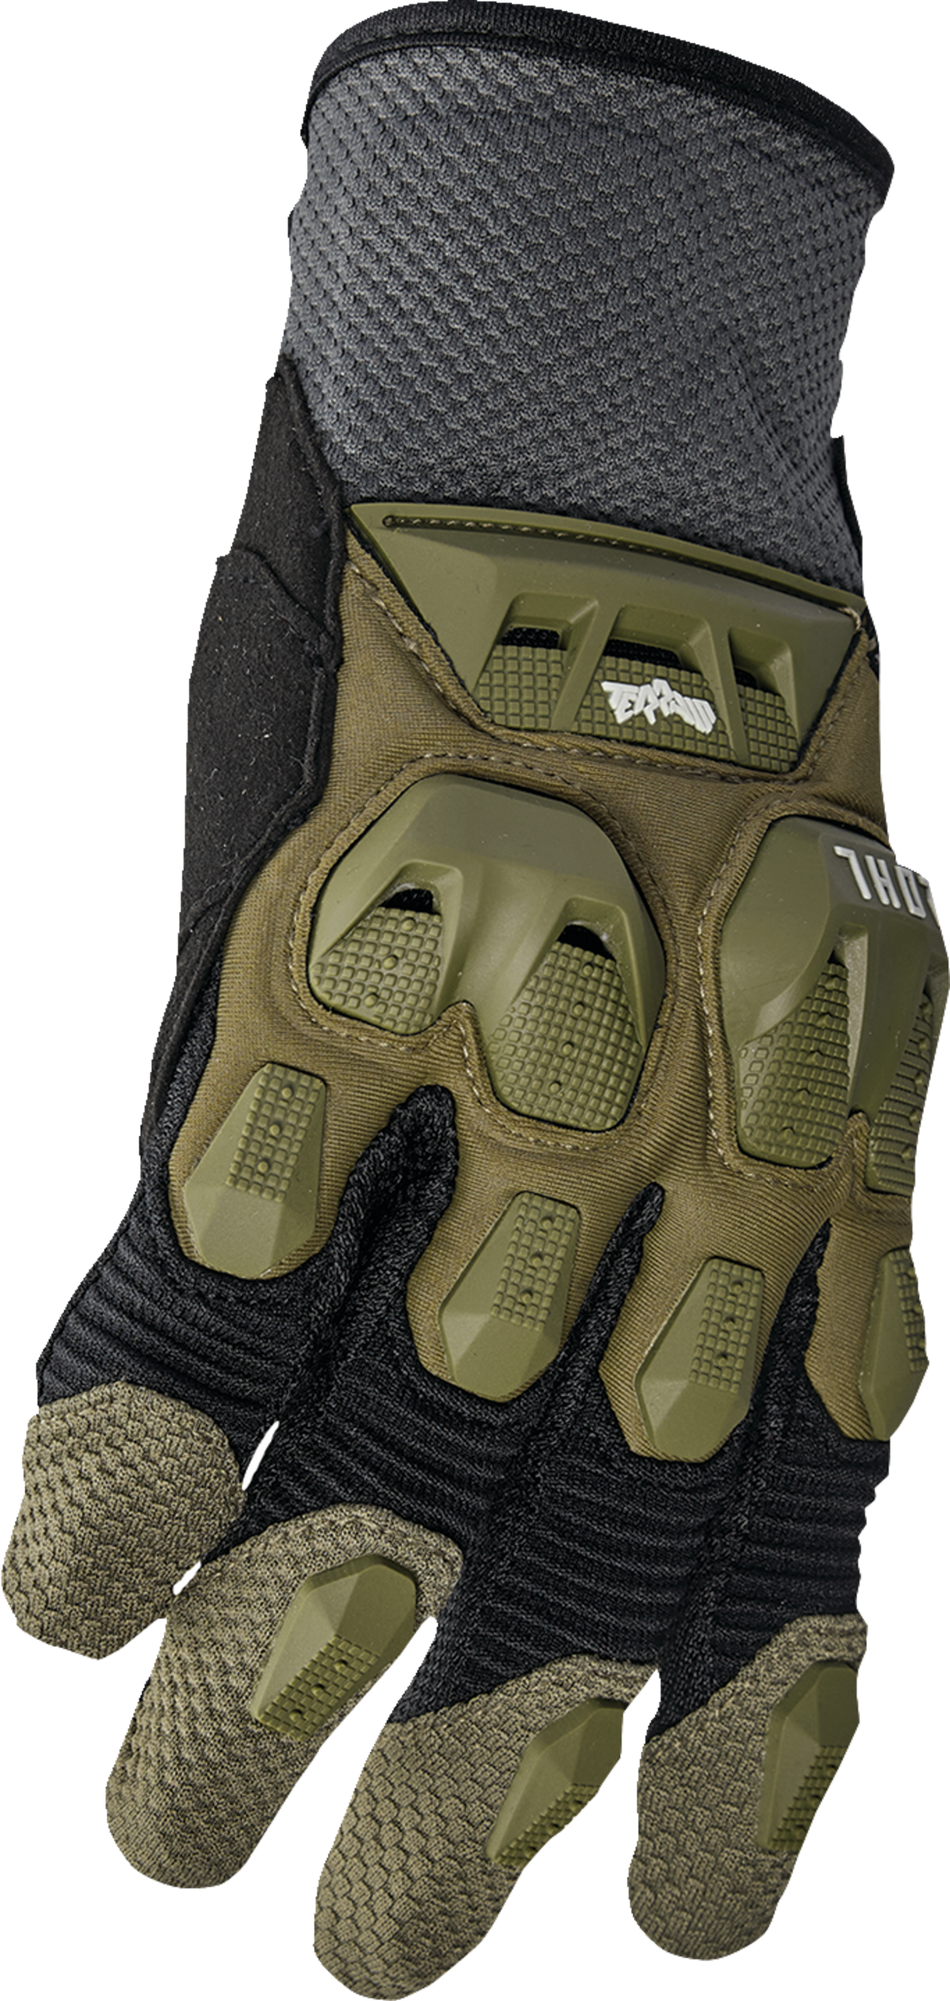 THOR Terrain Gloves - Army/Charcoal - Small 3330-7286